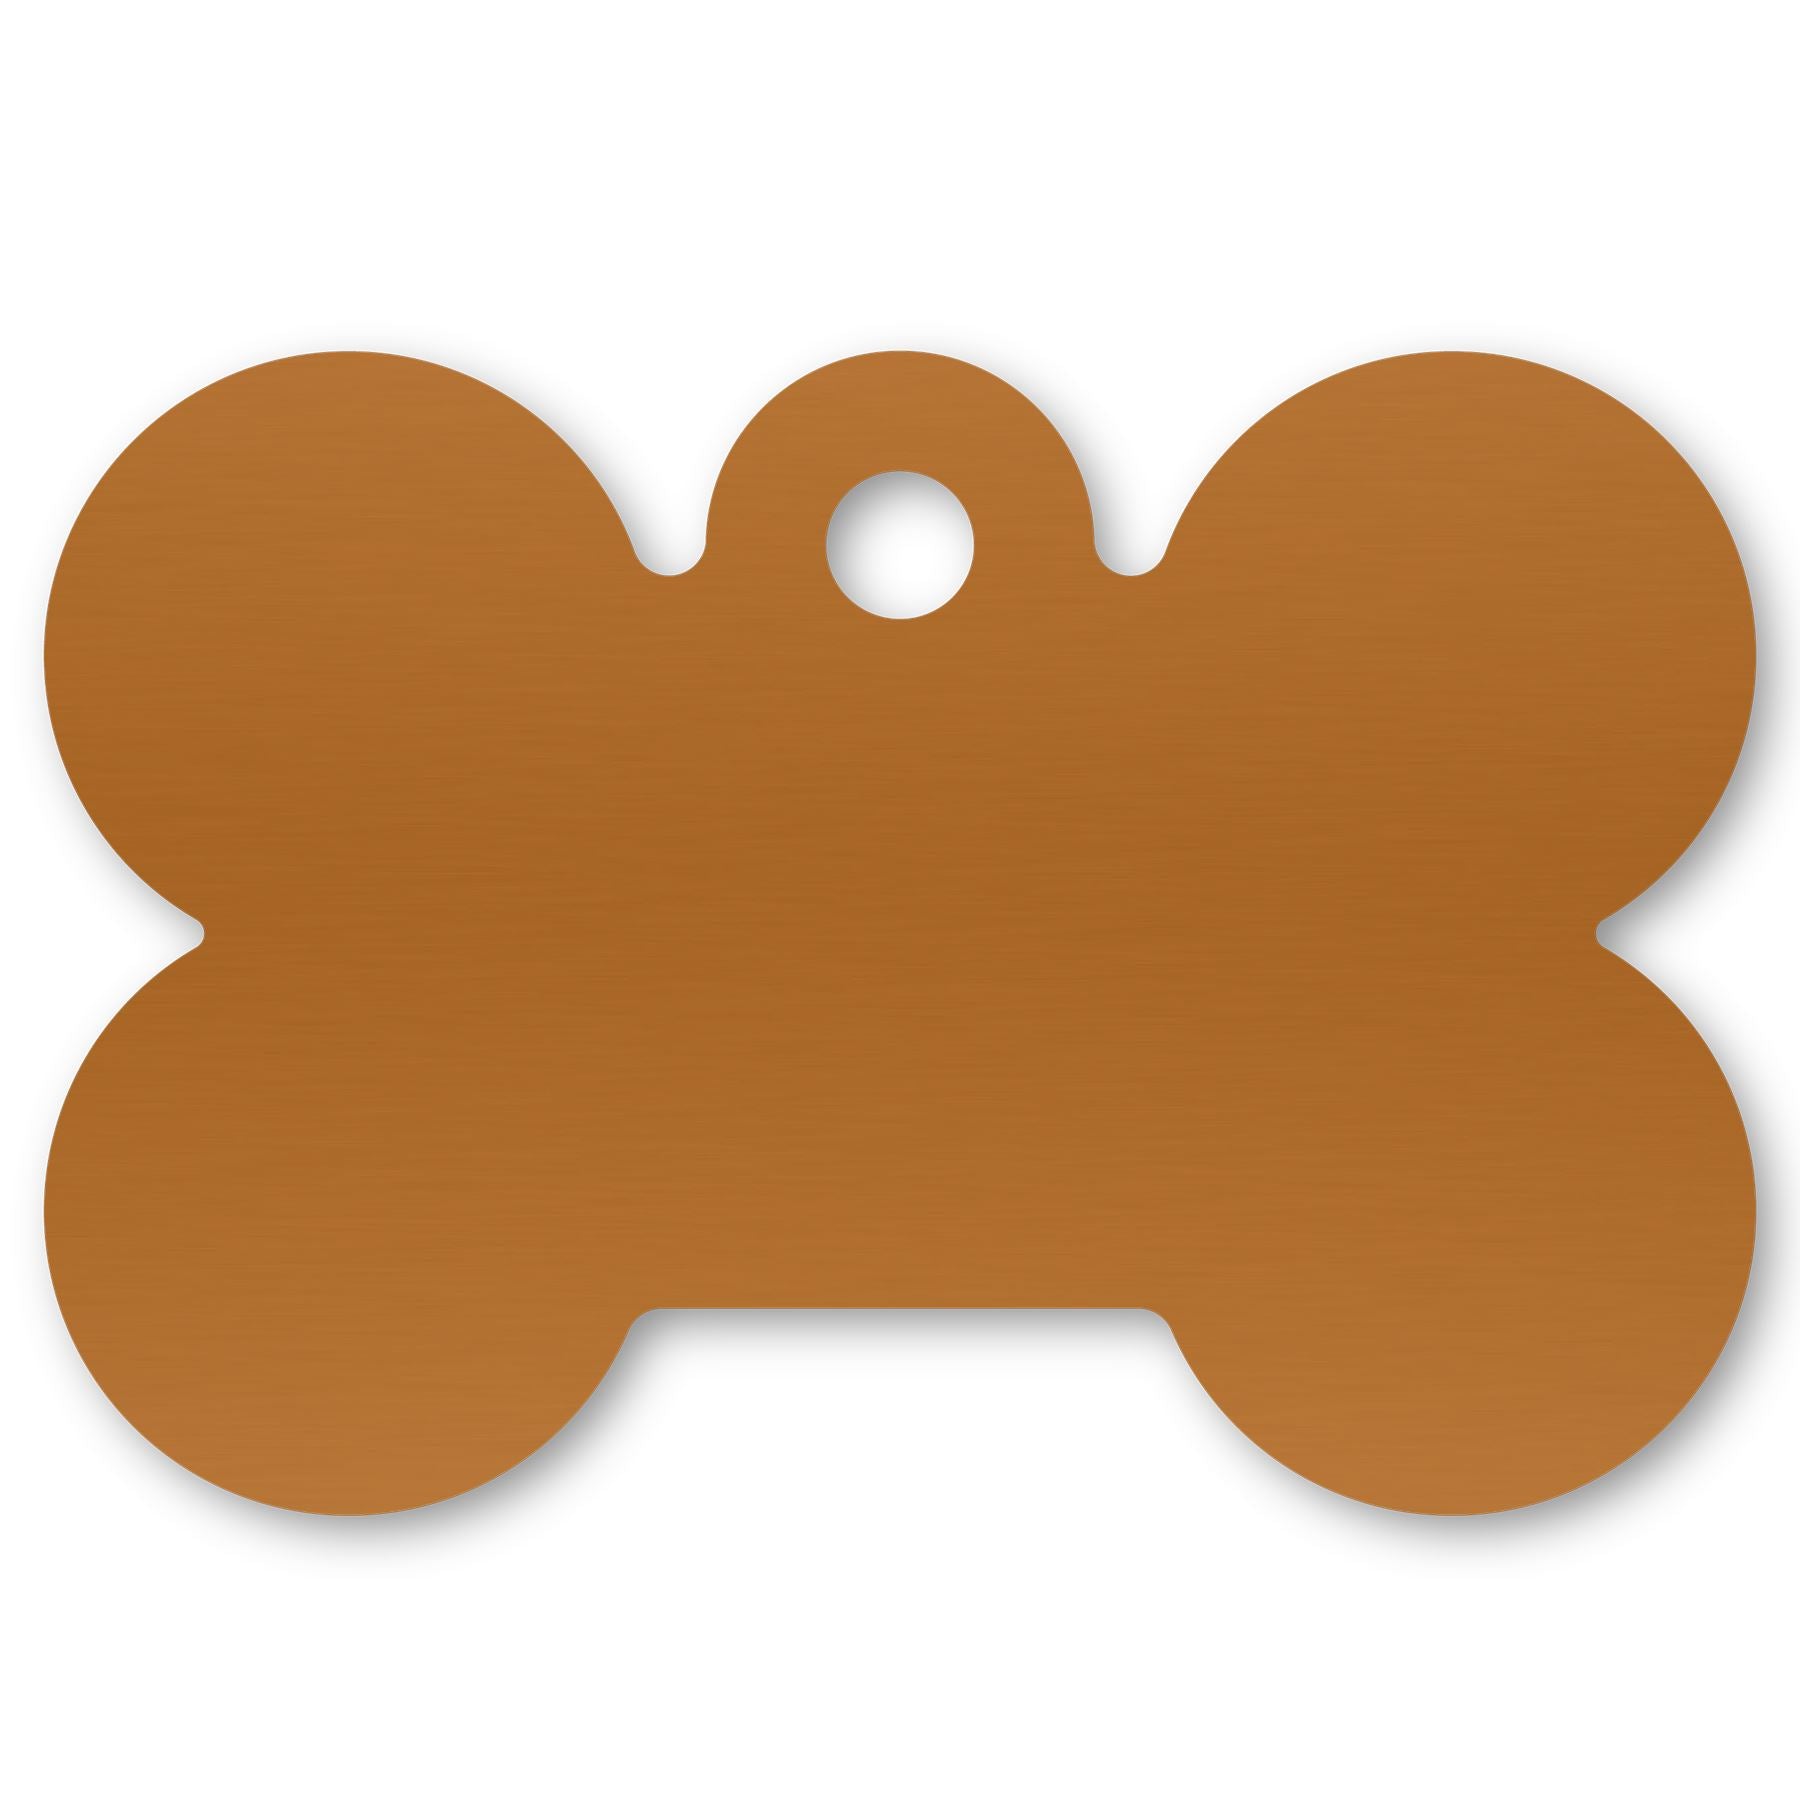 Anodized Aluminum Dog Bone Shaped Tags, 1-1/32" x 1-5/16" with 1/8" Hole, Laser Engraved Metal Tags Craftworks NW Orange 